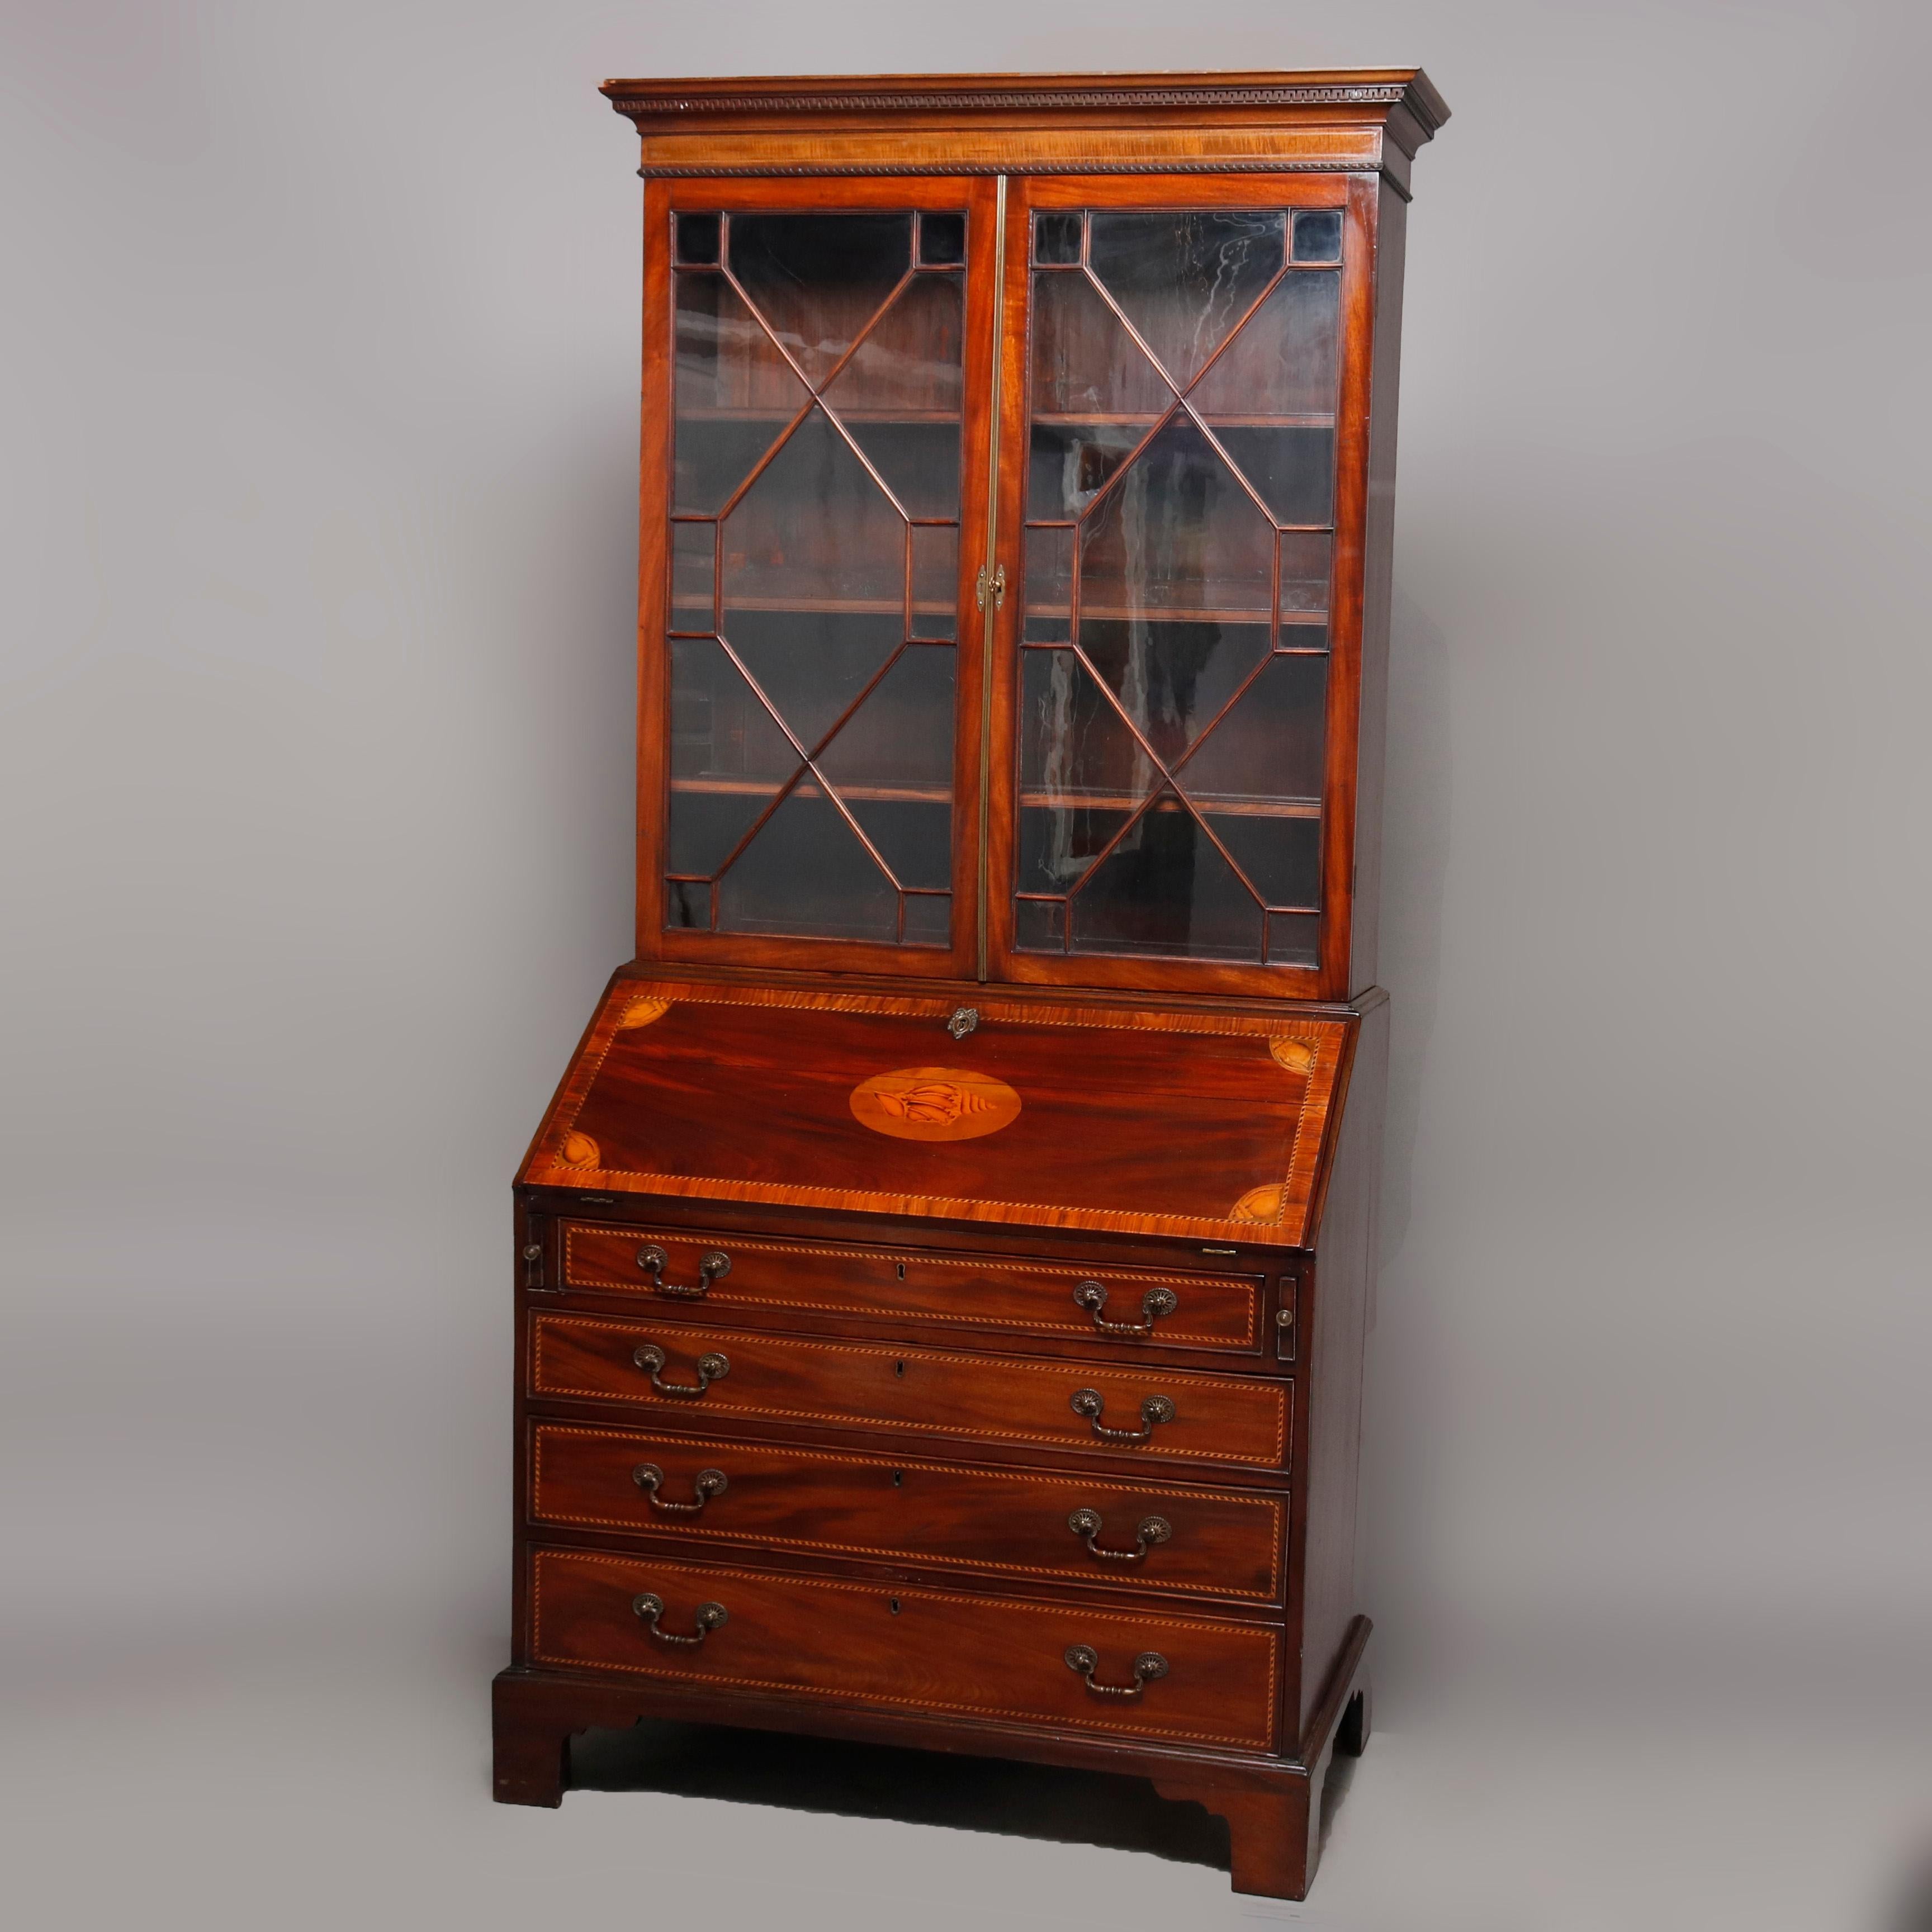 An antique English George III secretary offers flame mahogany construction with upper bookcase having double glass doors with muntins in diamond pattern and surmounting slant front desk with crossbanded and satinwood inlaid parquetry shell medallion